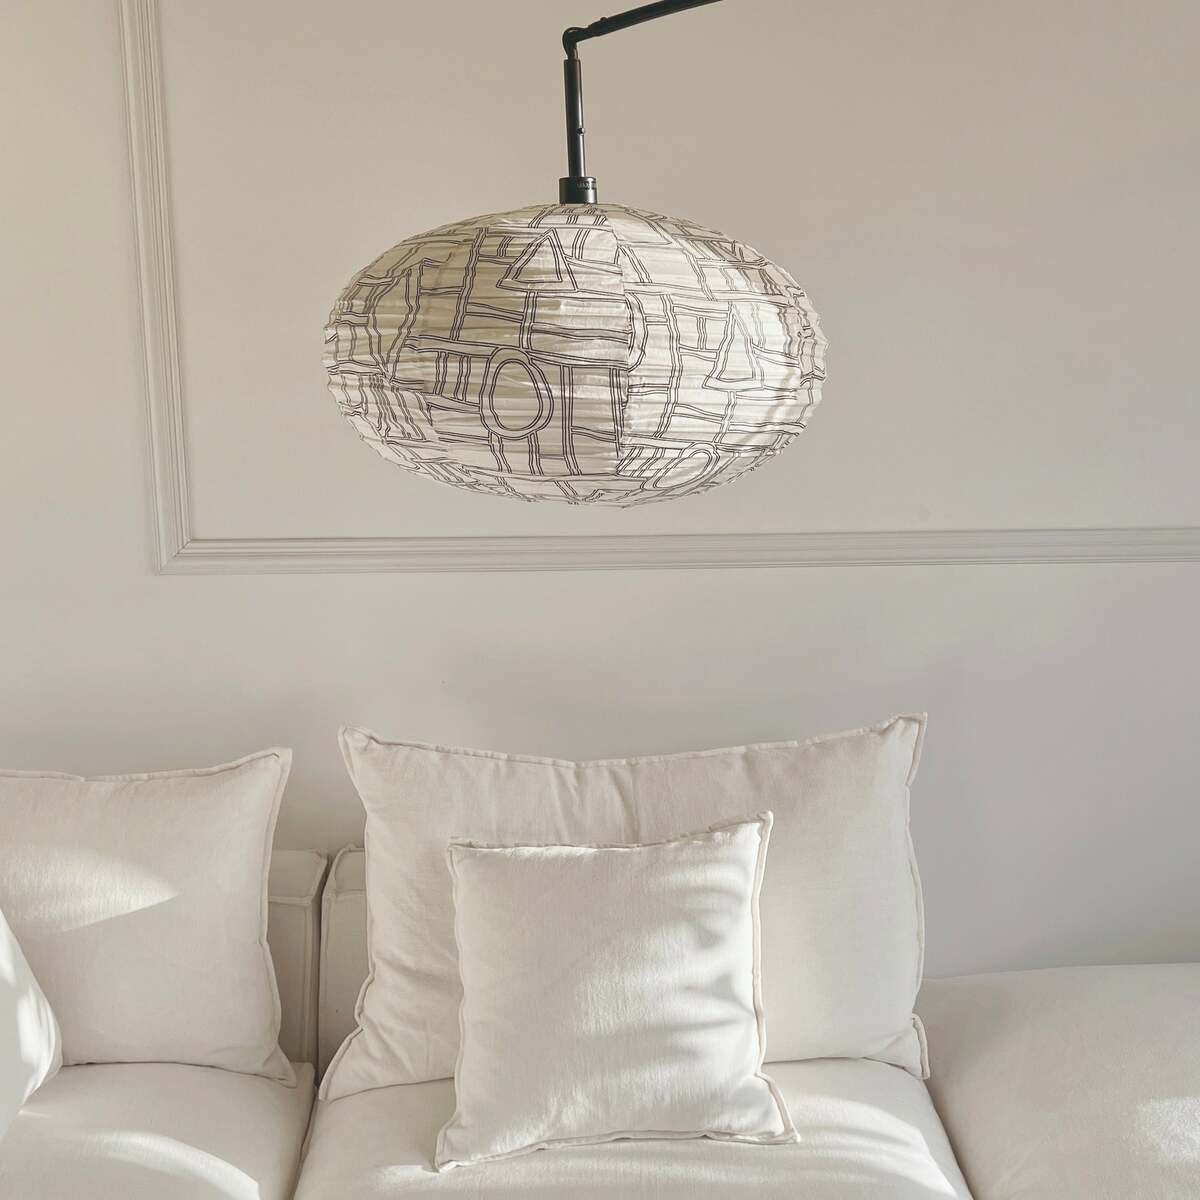 Japanese-Style Fabric Pendant Light Shades | Curiouser Curiouser